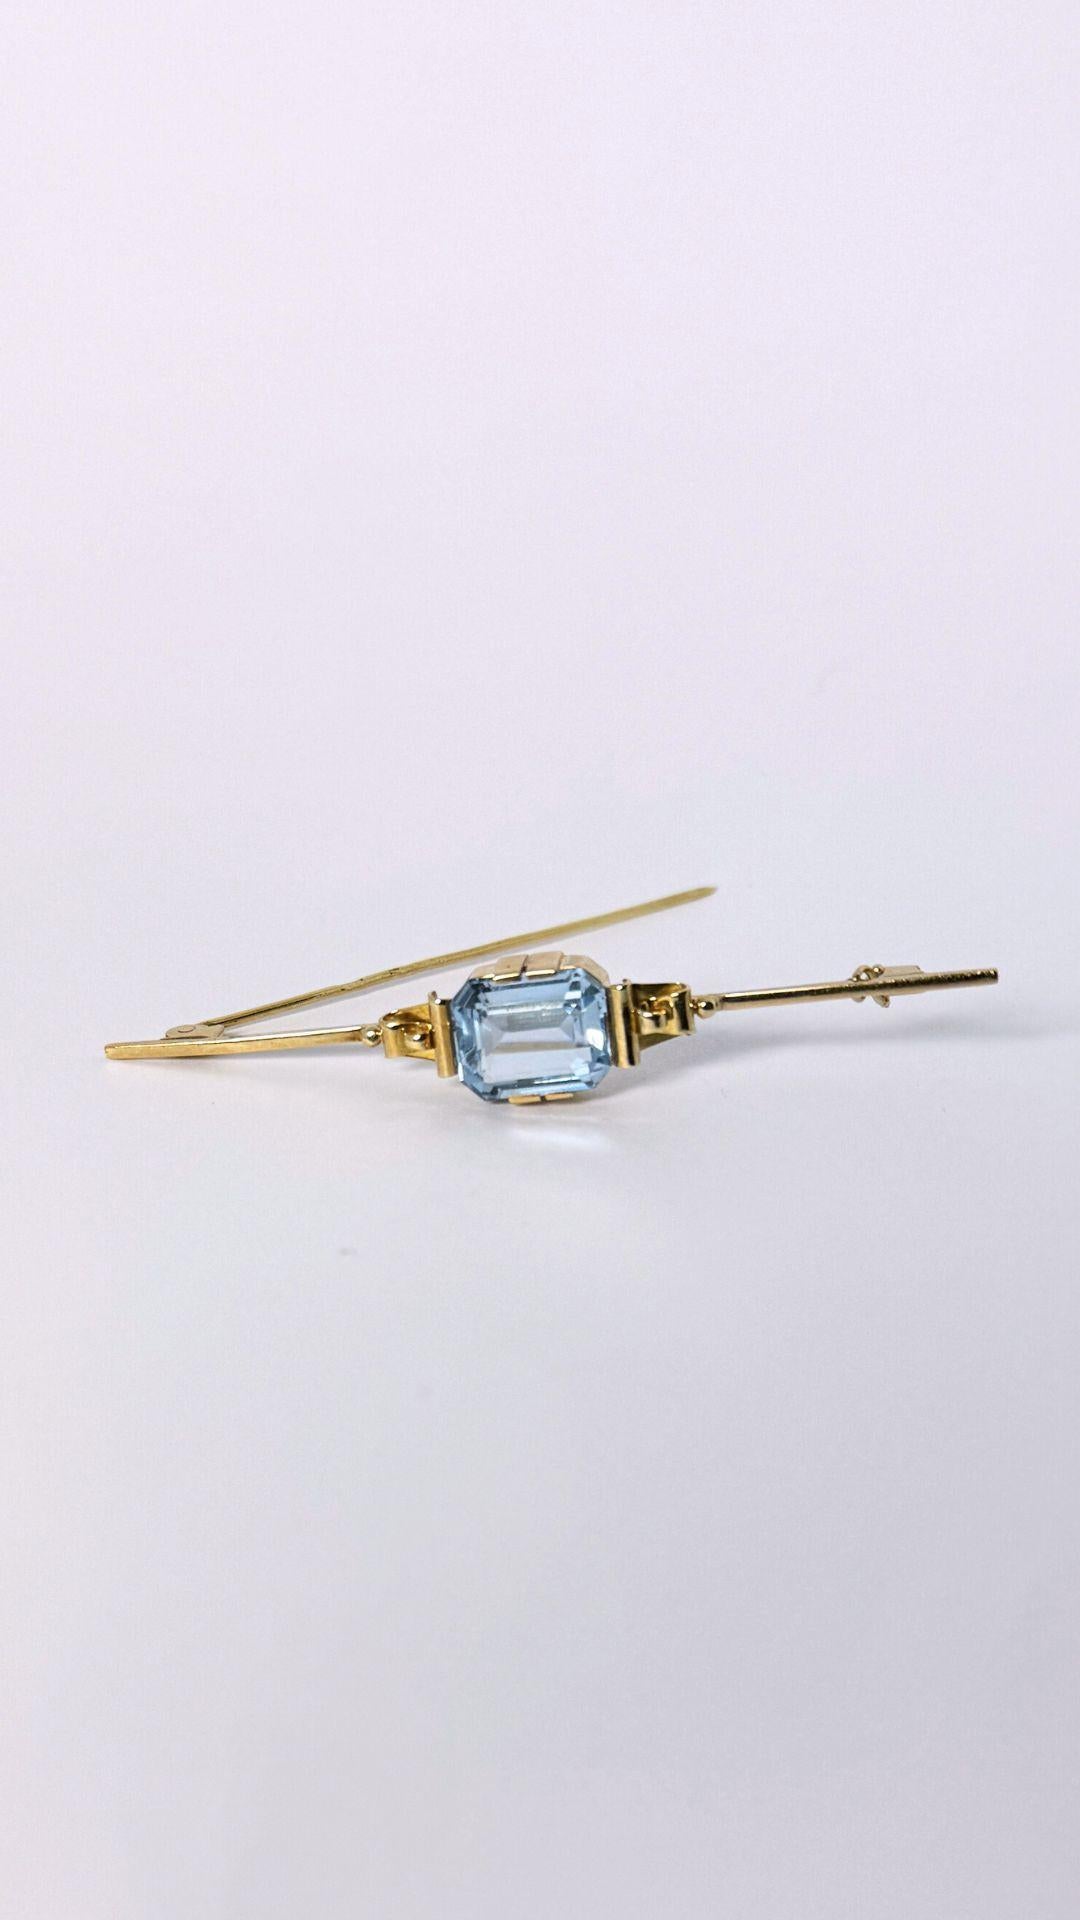 European vintage pin 14 carat gold with blue topaz In Good Condition For Sale In Heemstede, NL